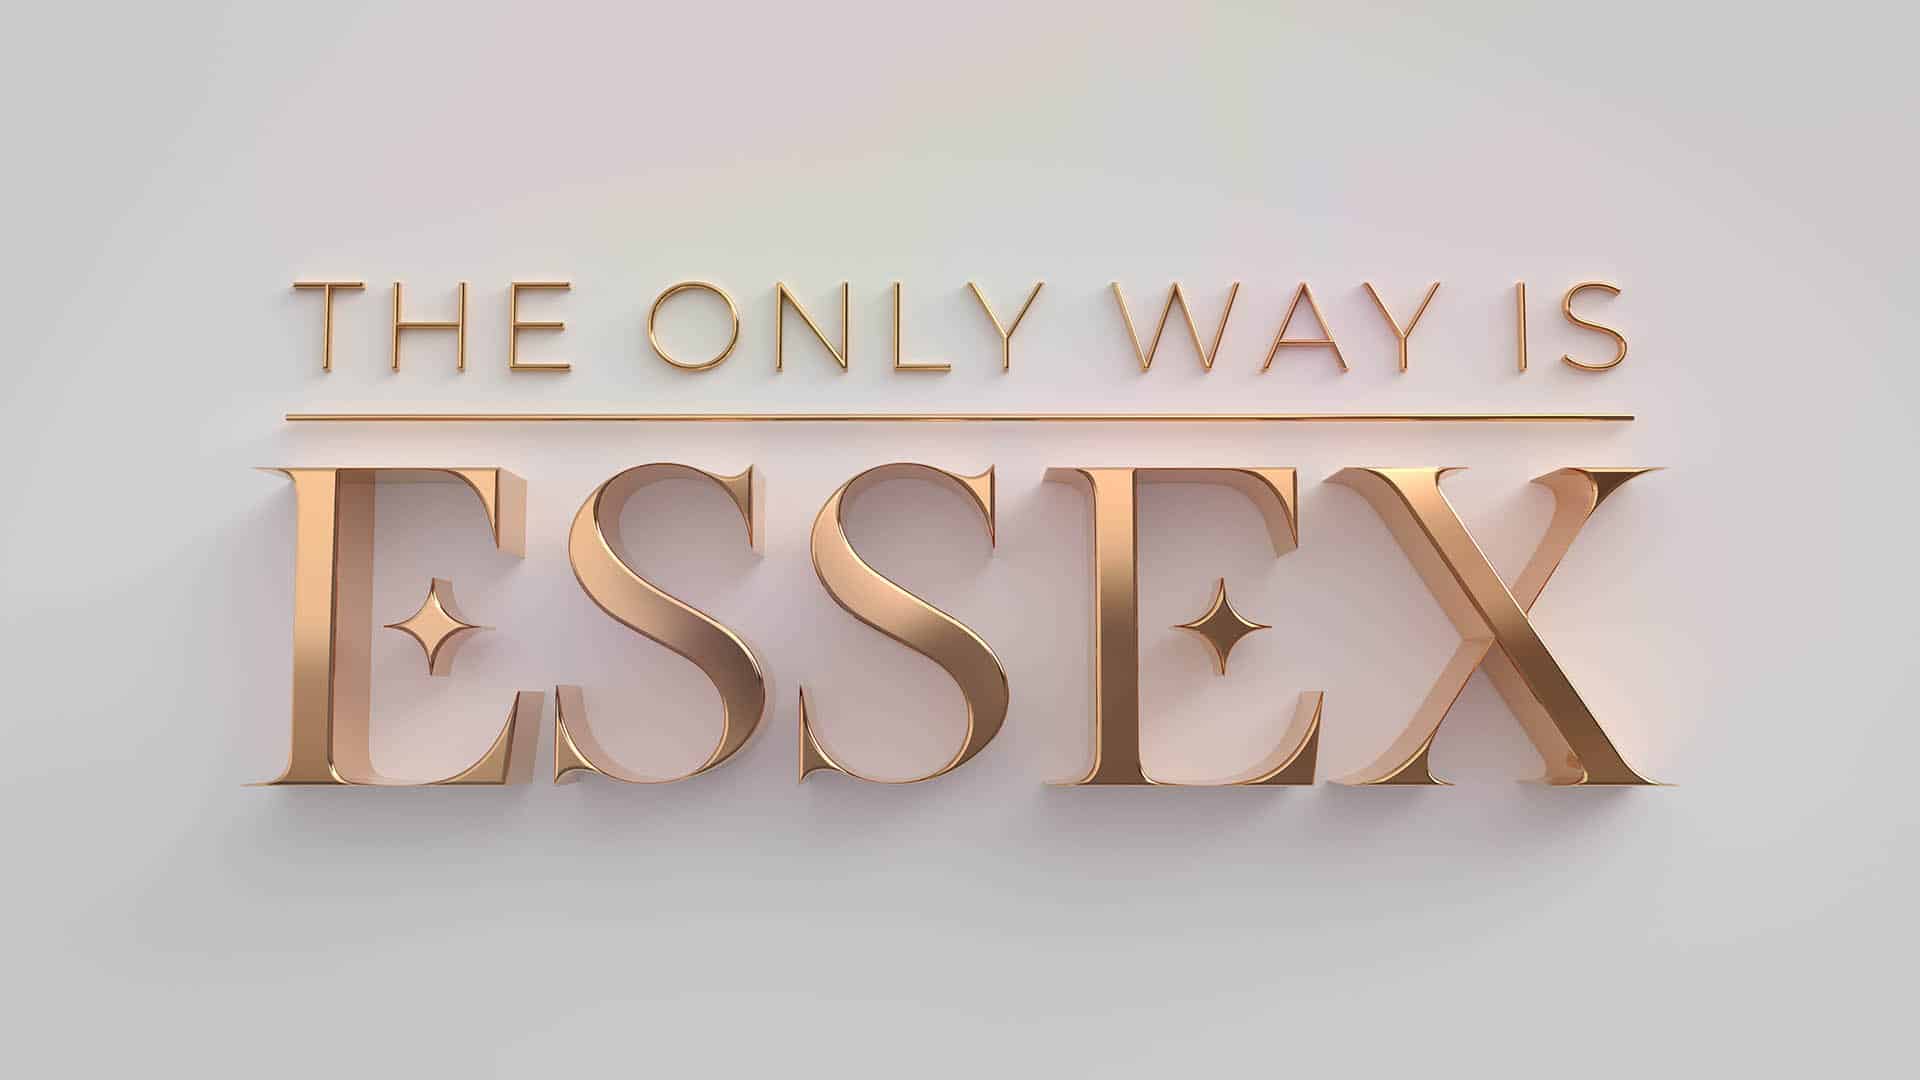 Series 33 of The Only Way Is Essex is announced